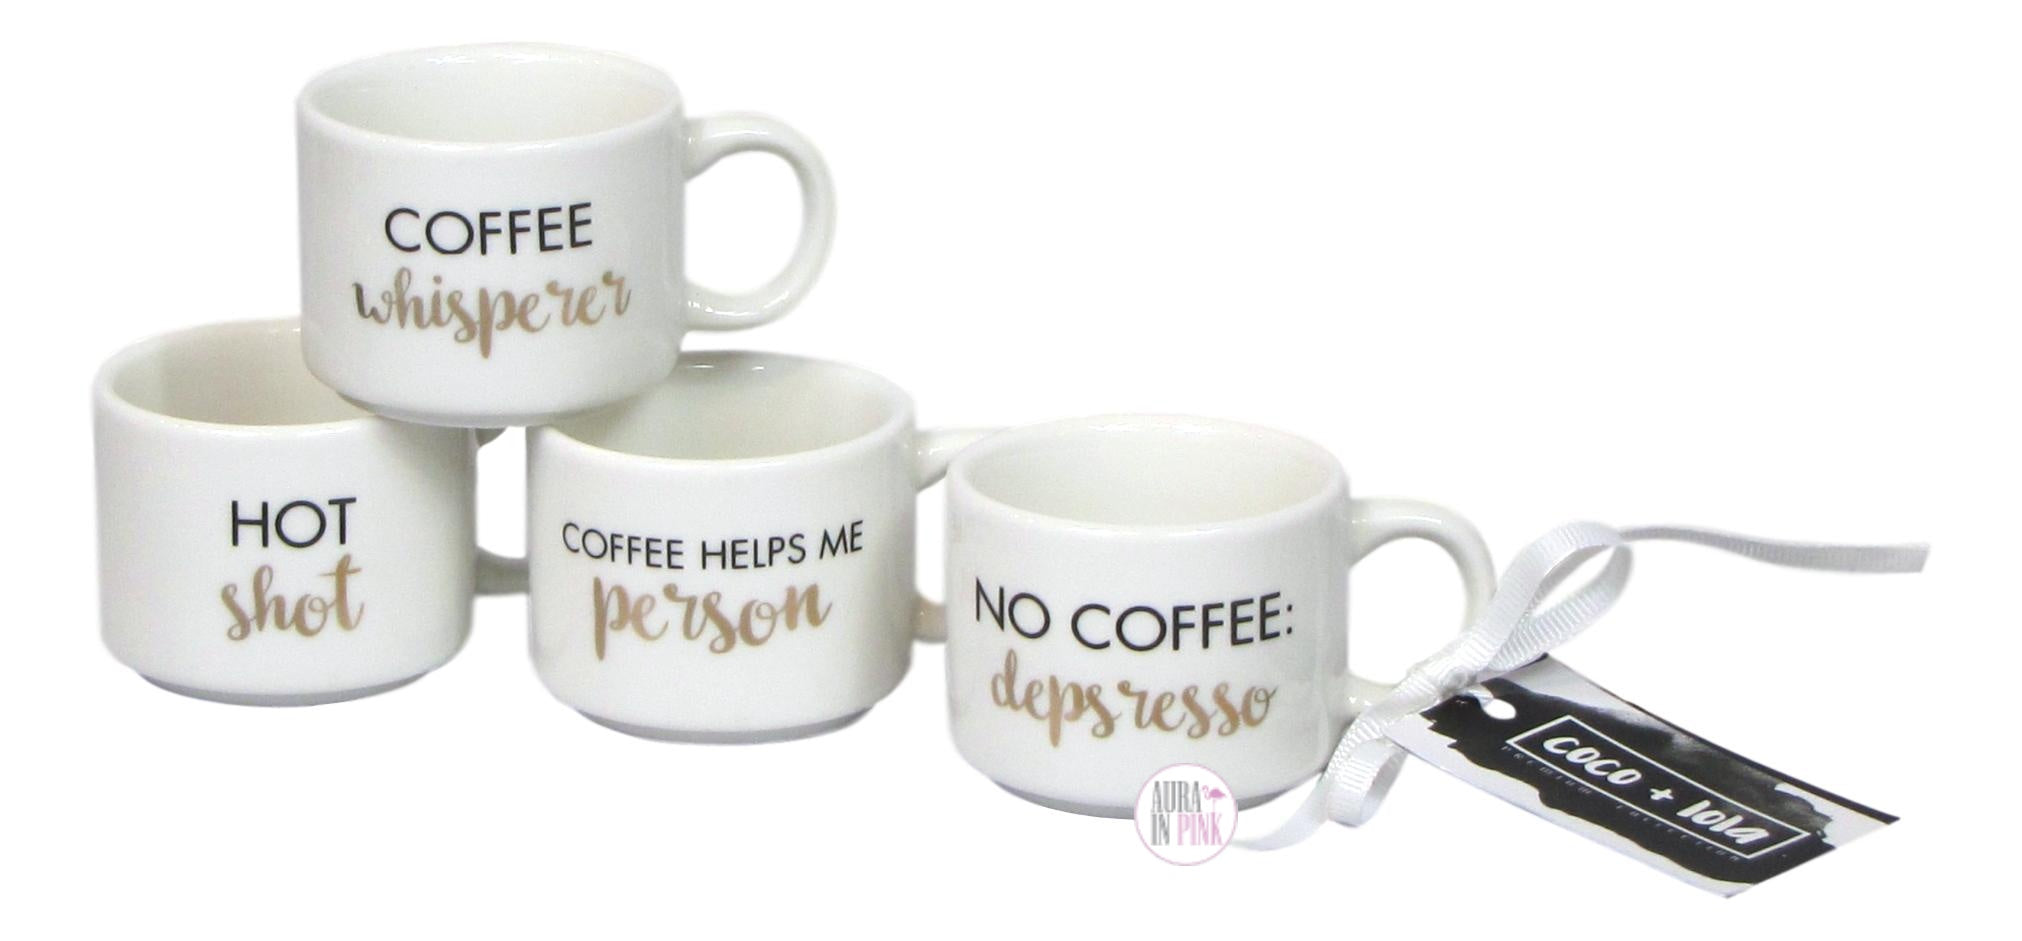 Stackable Espresso Cups Set of 4 With Stand Mug Shot White NEW